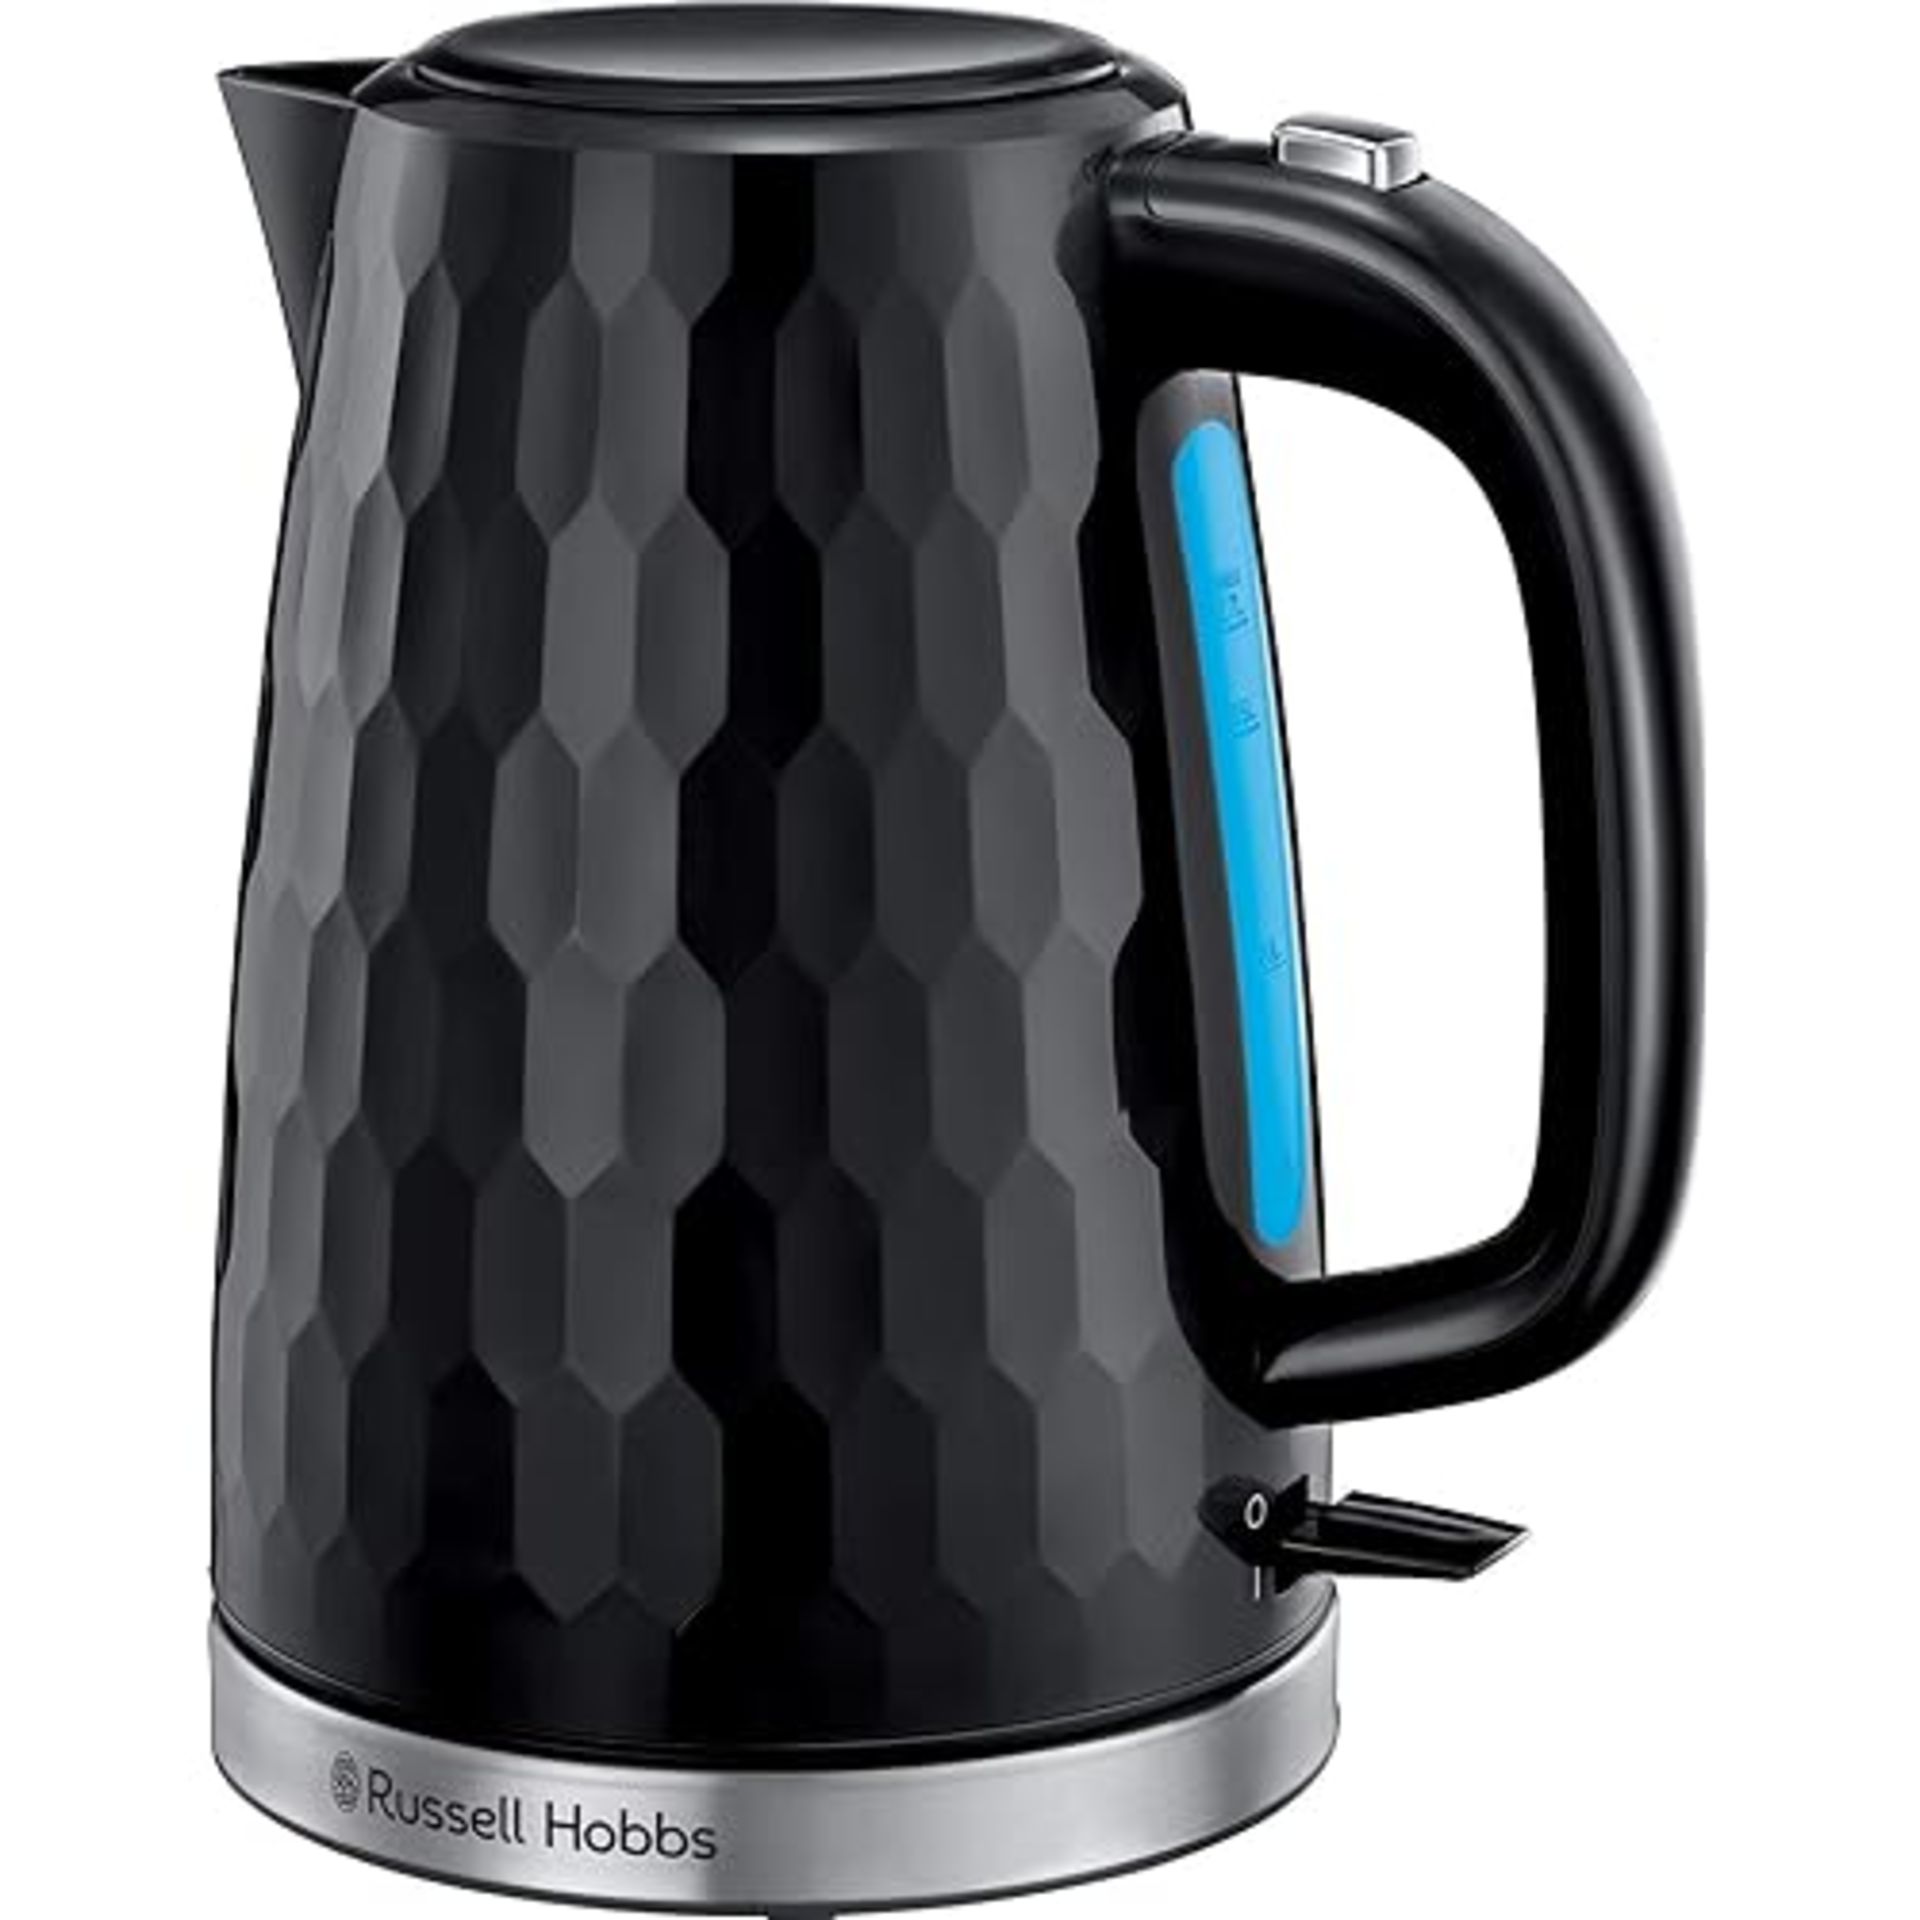 Russell Hobbs 26051 Cordless Electric Kettle - Contemporary Honeycomb Design with Fast Boil and B...